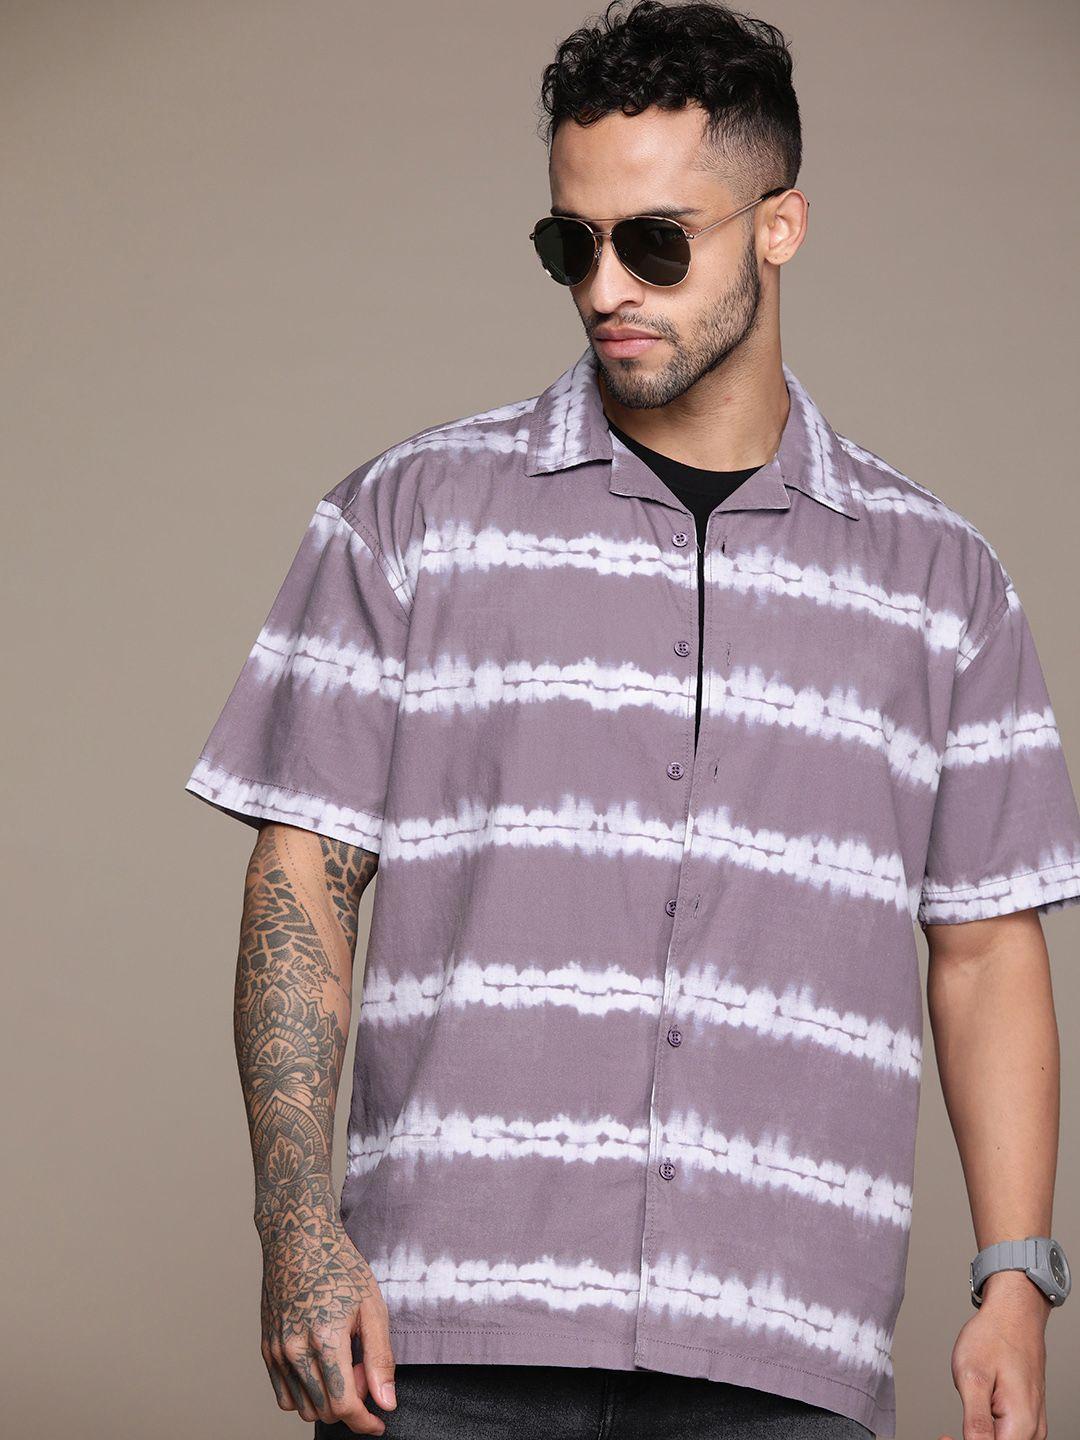 the-roadster-lifestyle-co.-tie-&-dye-pure-cotton-relaxed-fit-shirt